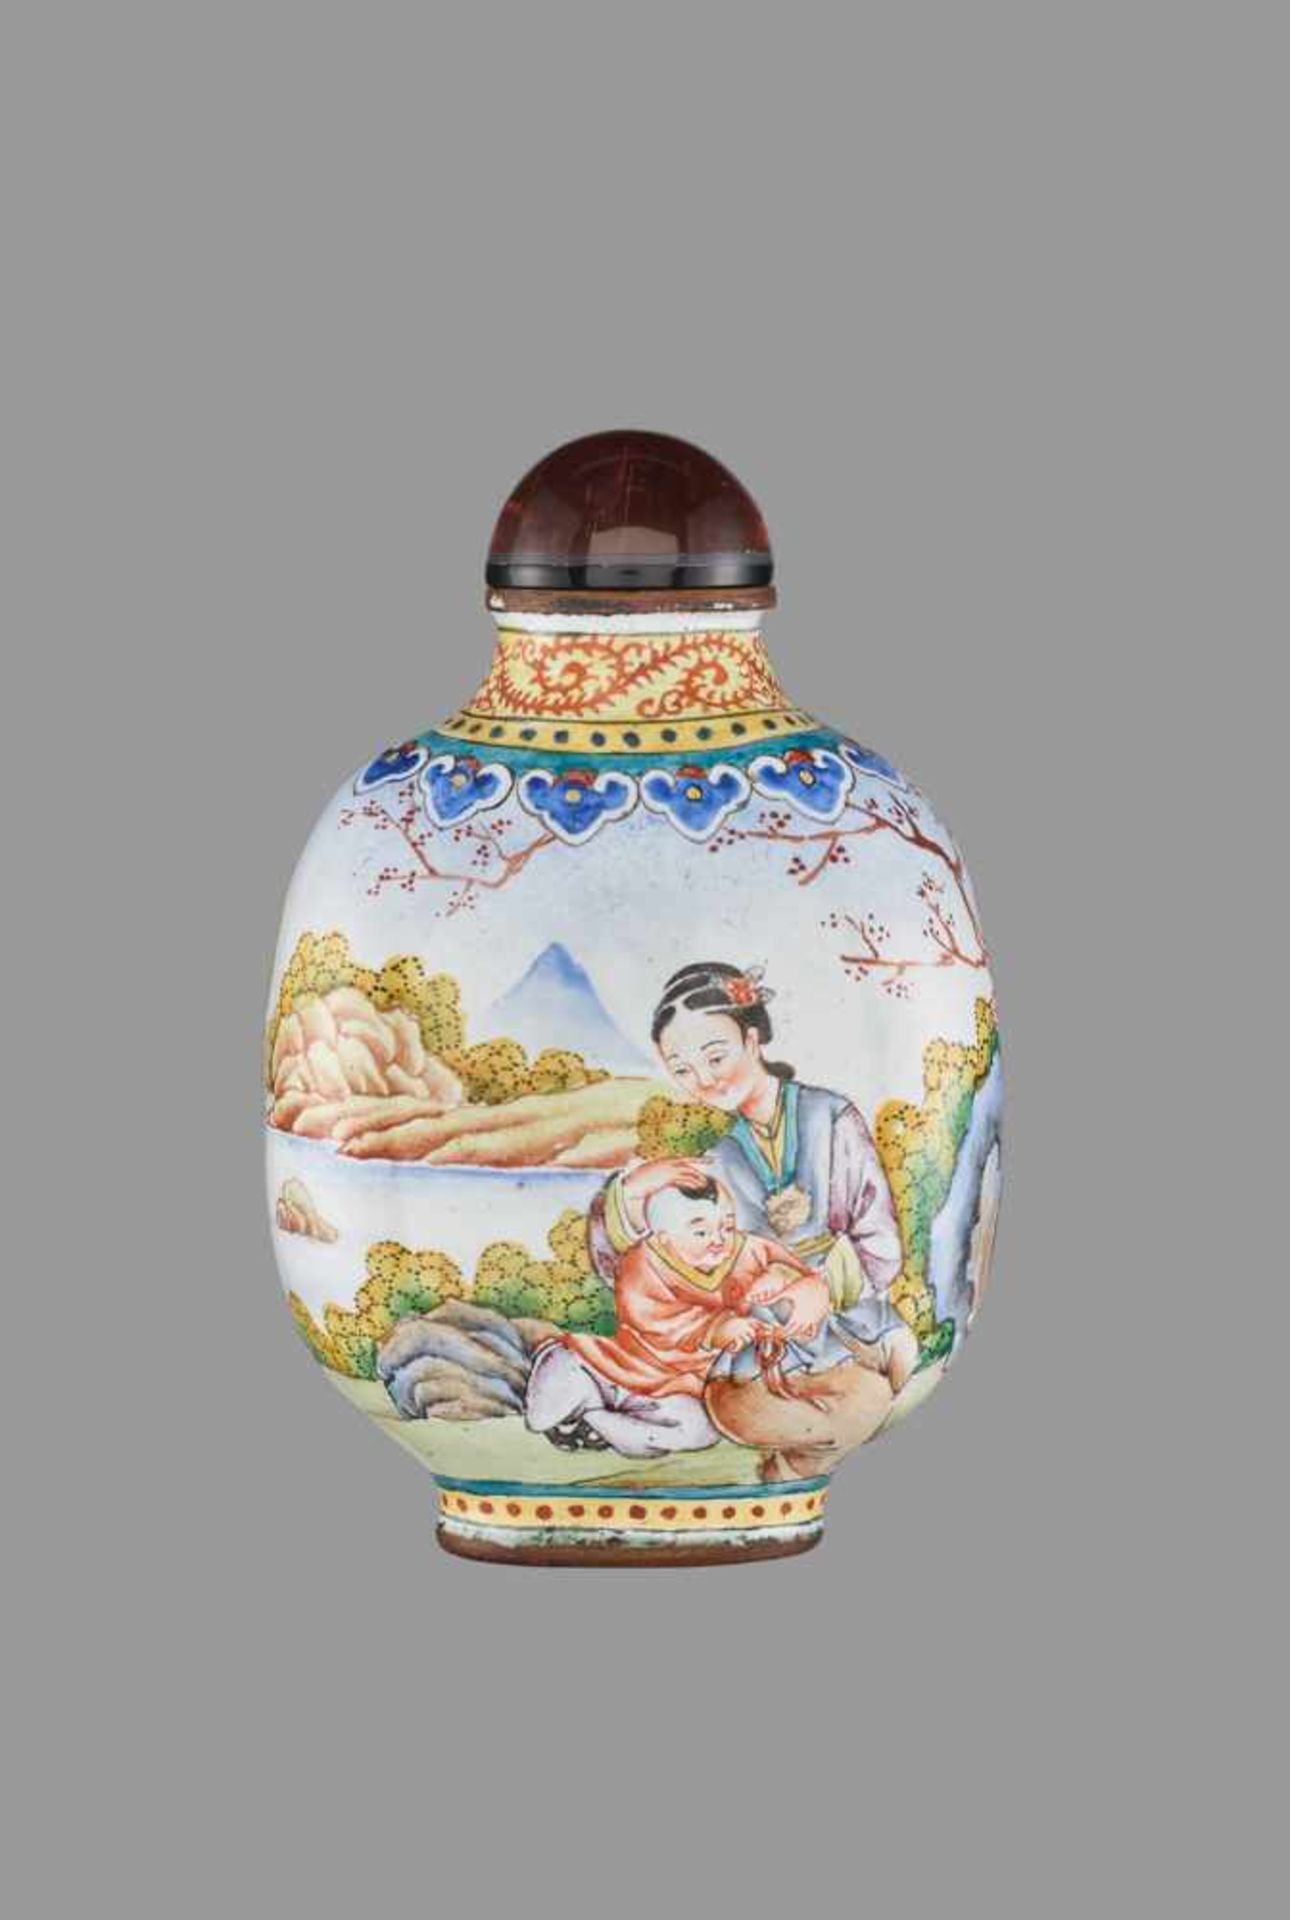 AN ENAMEL ON COPPER SNUFF BOTTLE, QIANLONG MARK AND PERIOD Multicolored enamel painting on white